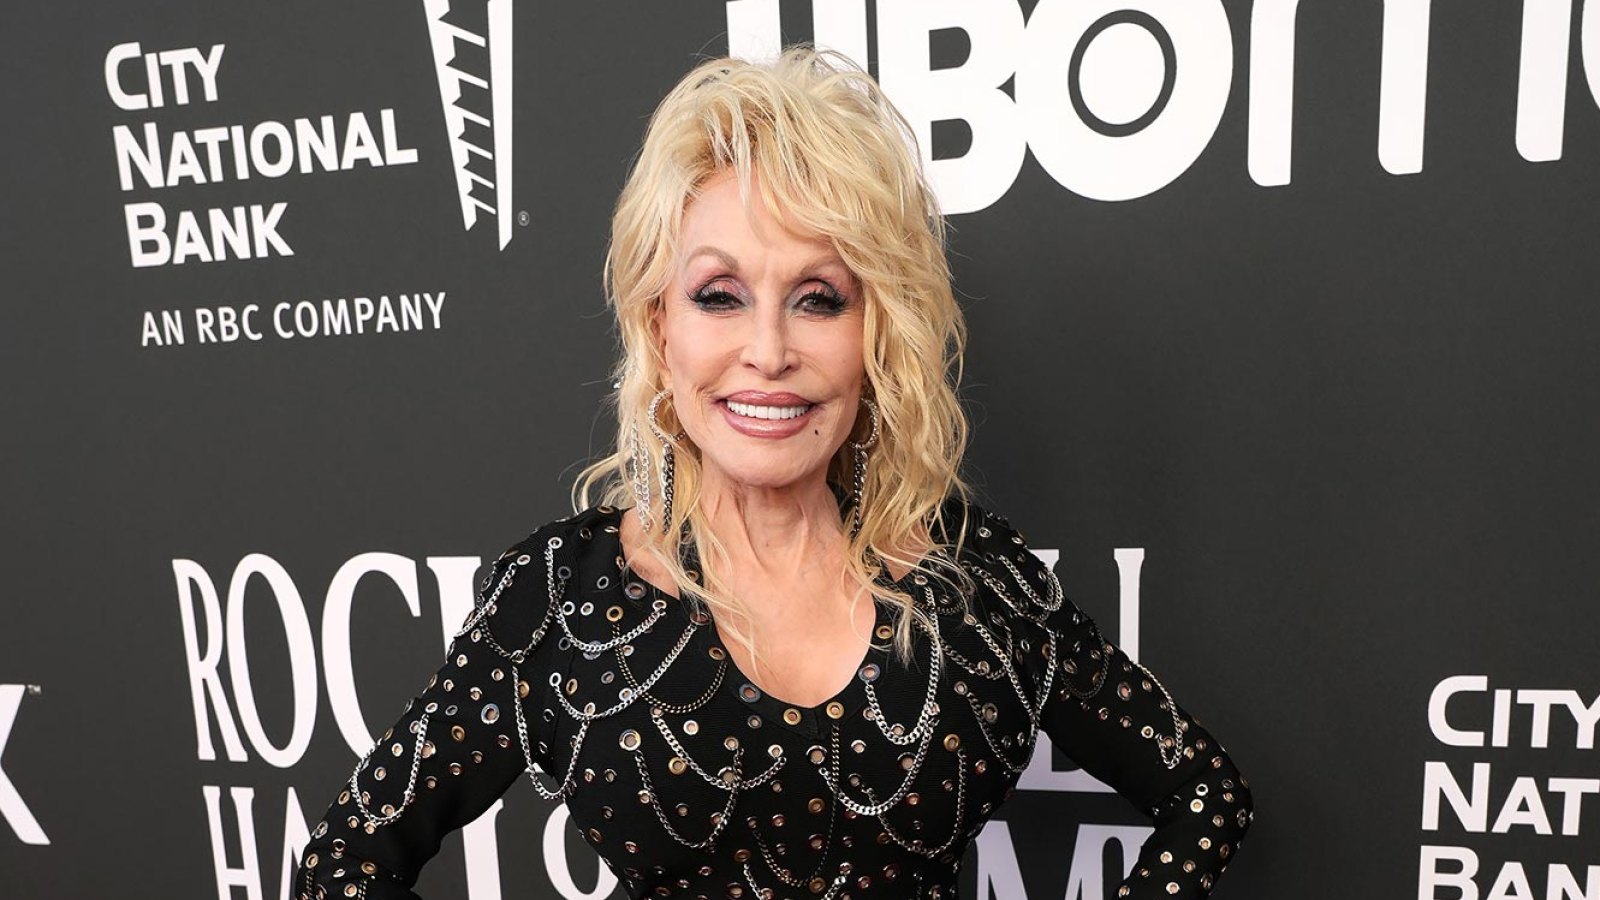 Dolly Parton Reacts After Beyonce Teases Covering Jolene on new Country Carter album